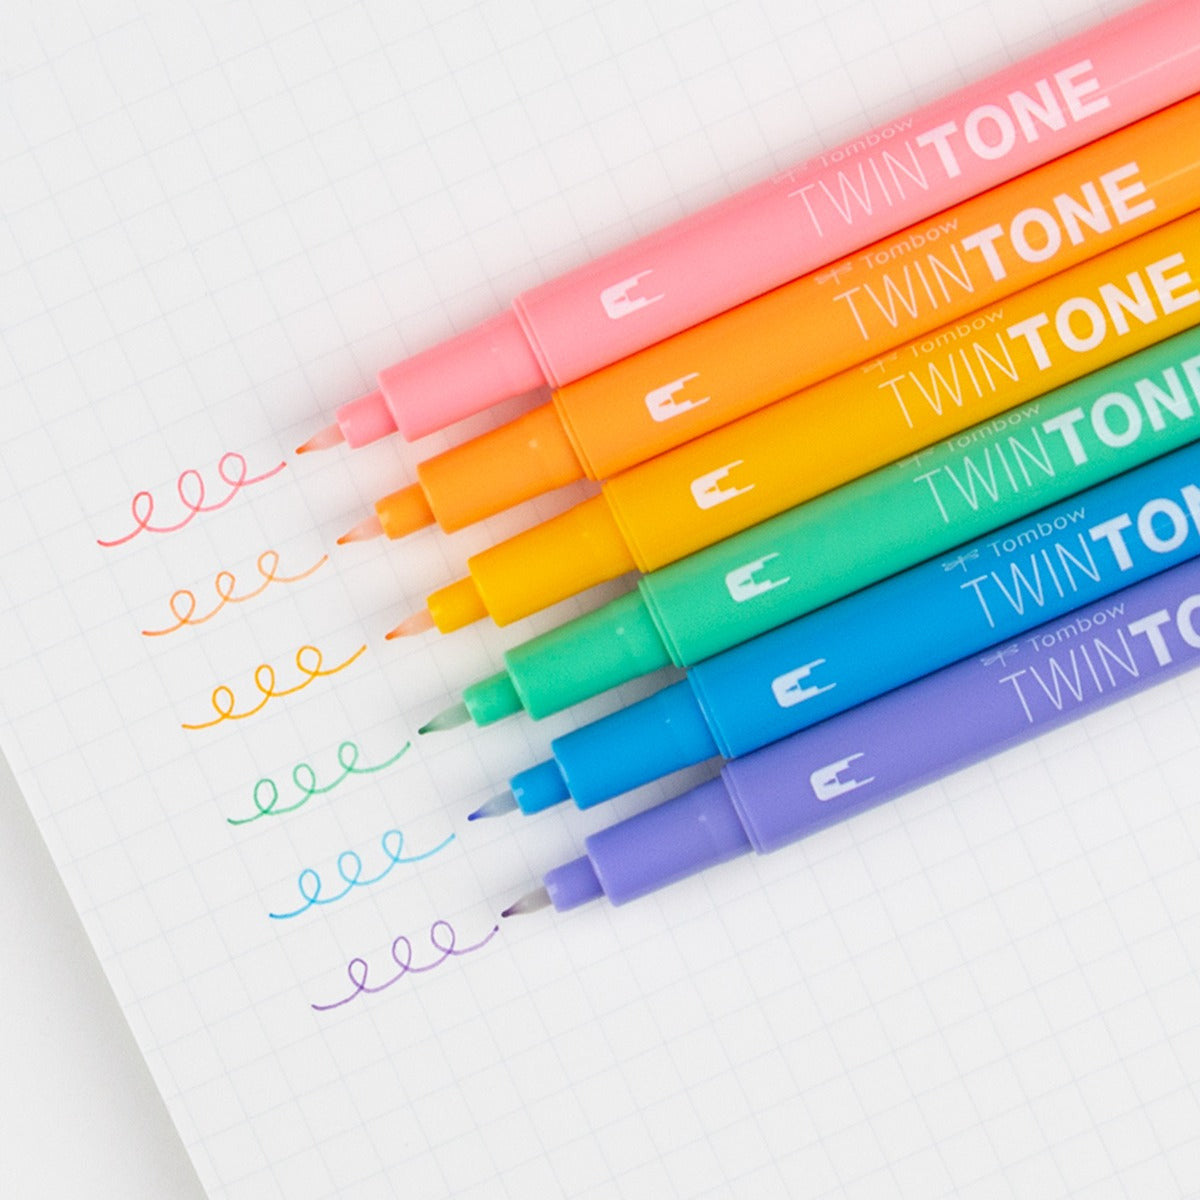 Tombow TwinTone Dual-Tip Marker Set, Broad & Extra-Fine Tips, Rainbow, 6 Count